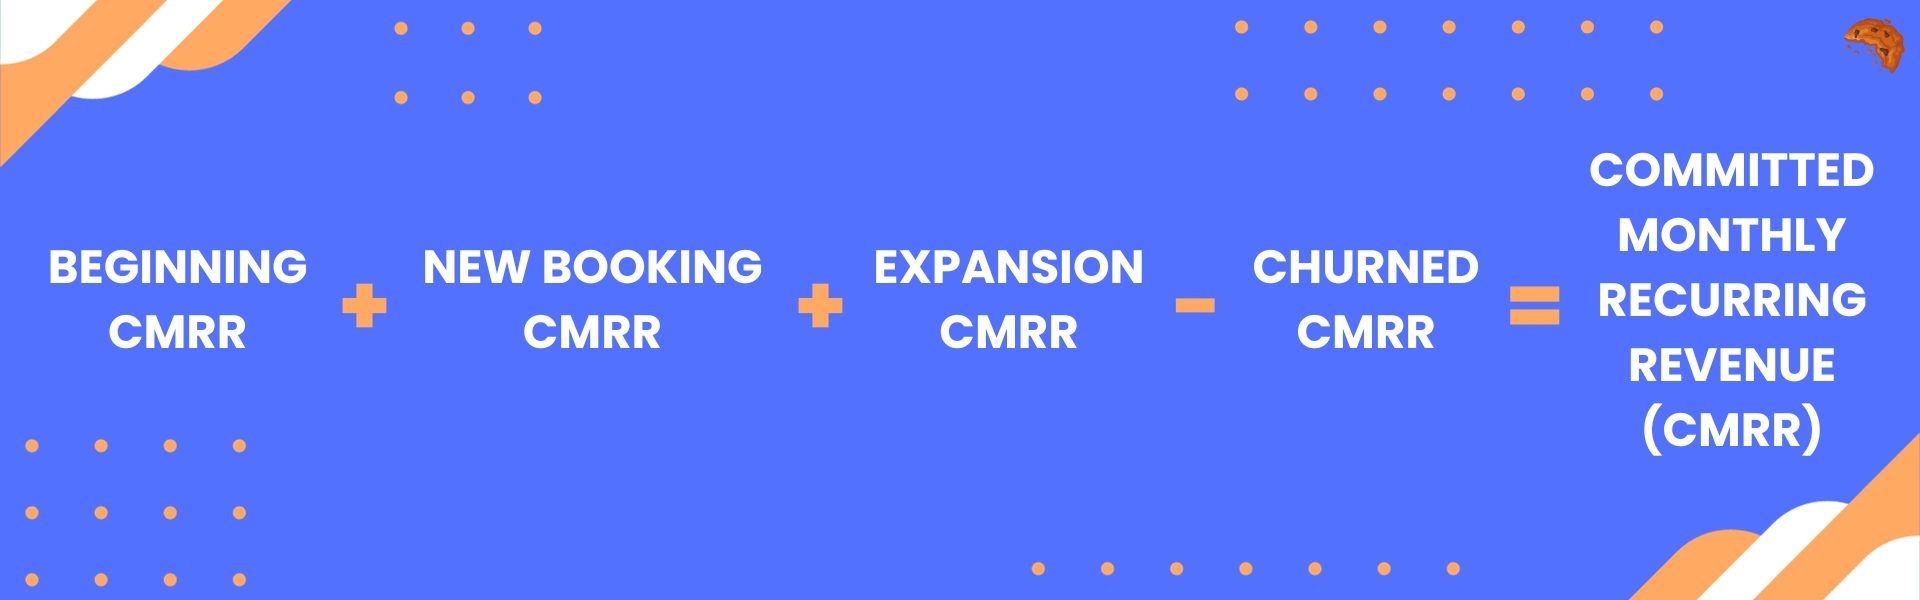 Committed Monthly Recurring Revenue (CMRR) Formula.